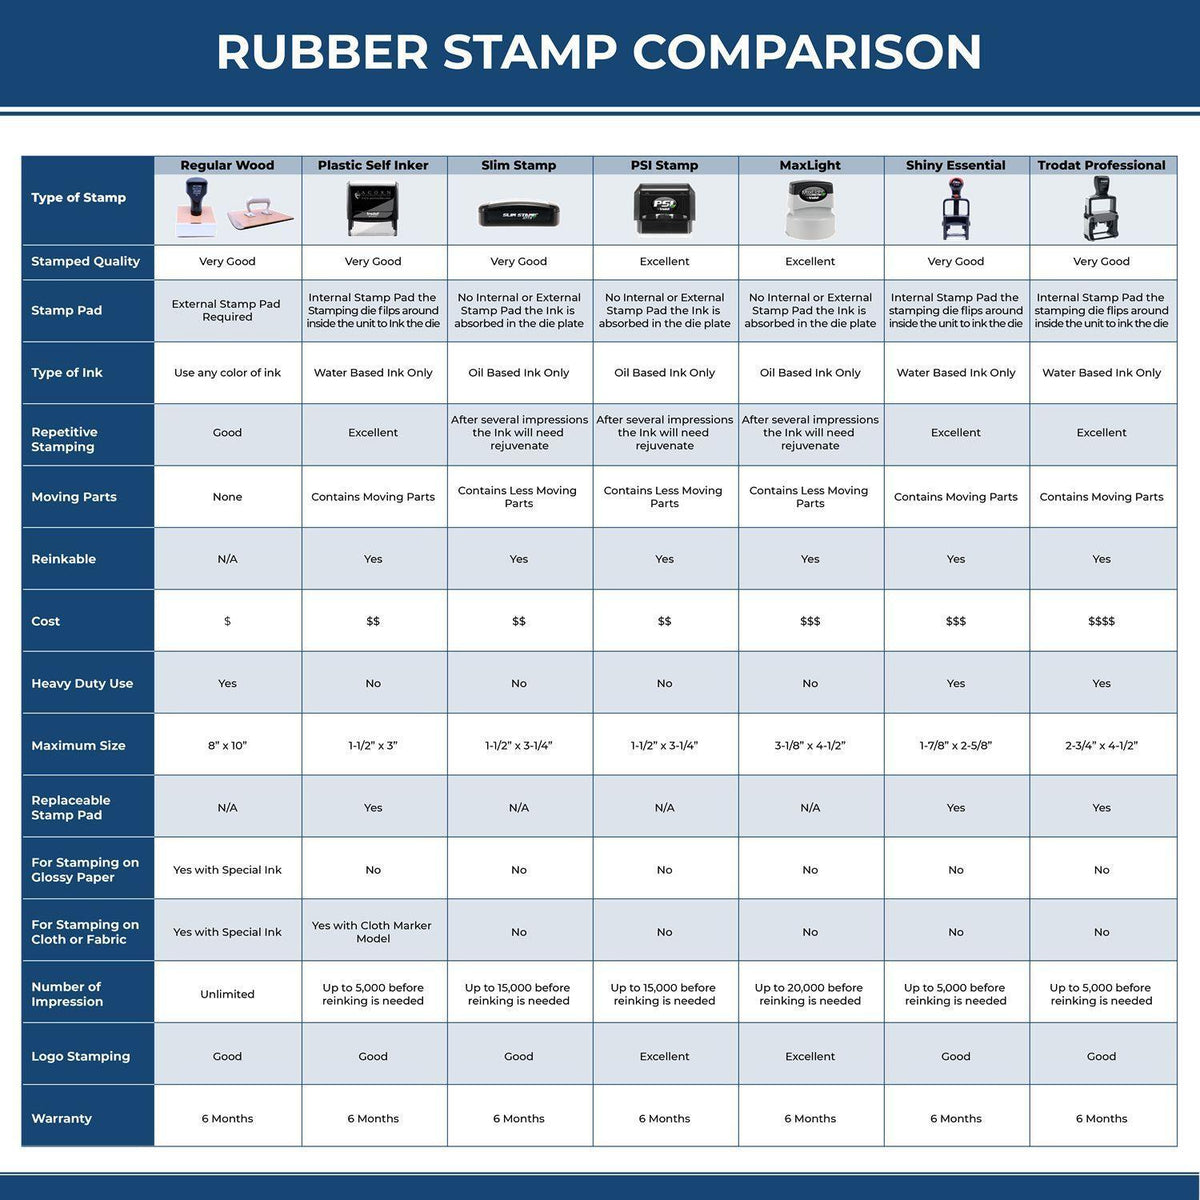 Large Cash Only Rubber Stamp 4541R Rubber Stamp Comparison